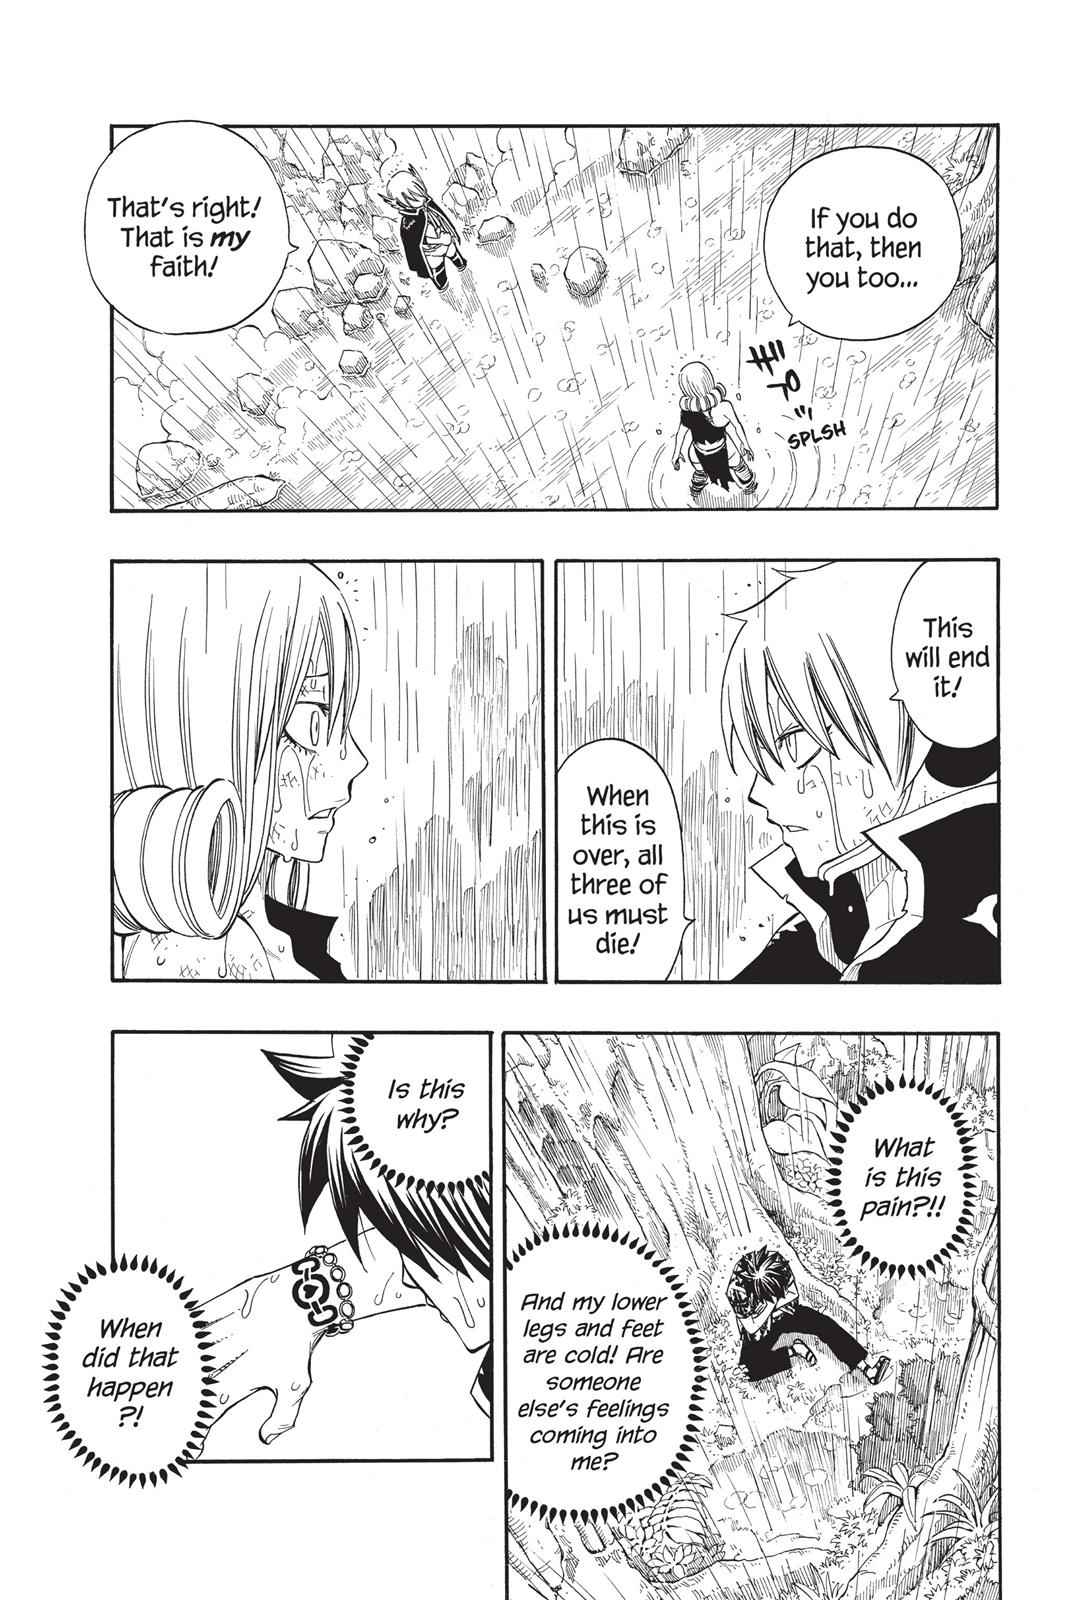  Chapter 230 image 003